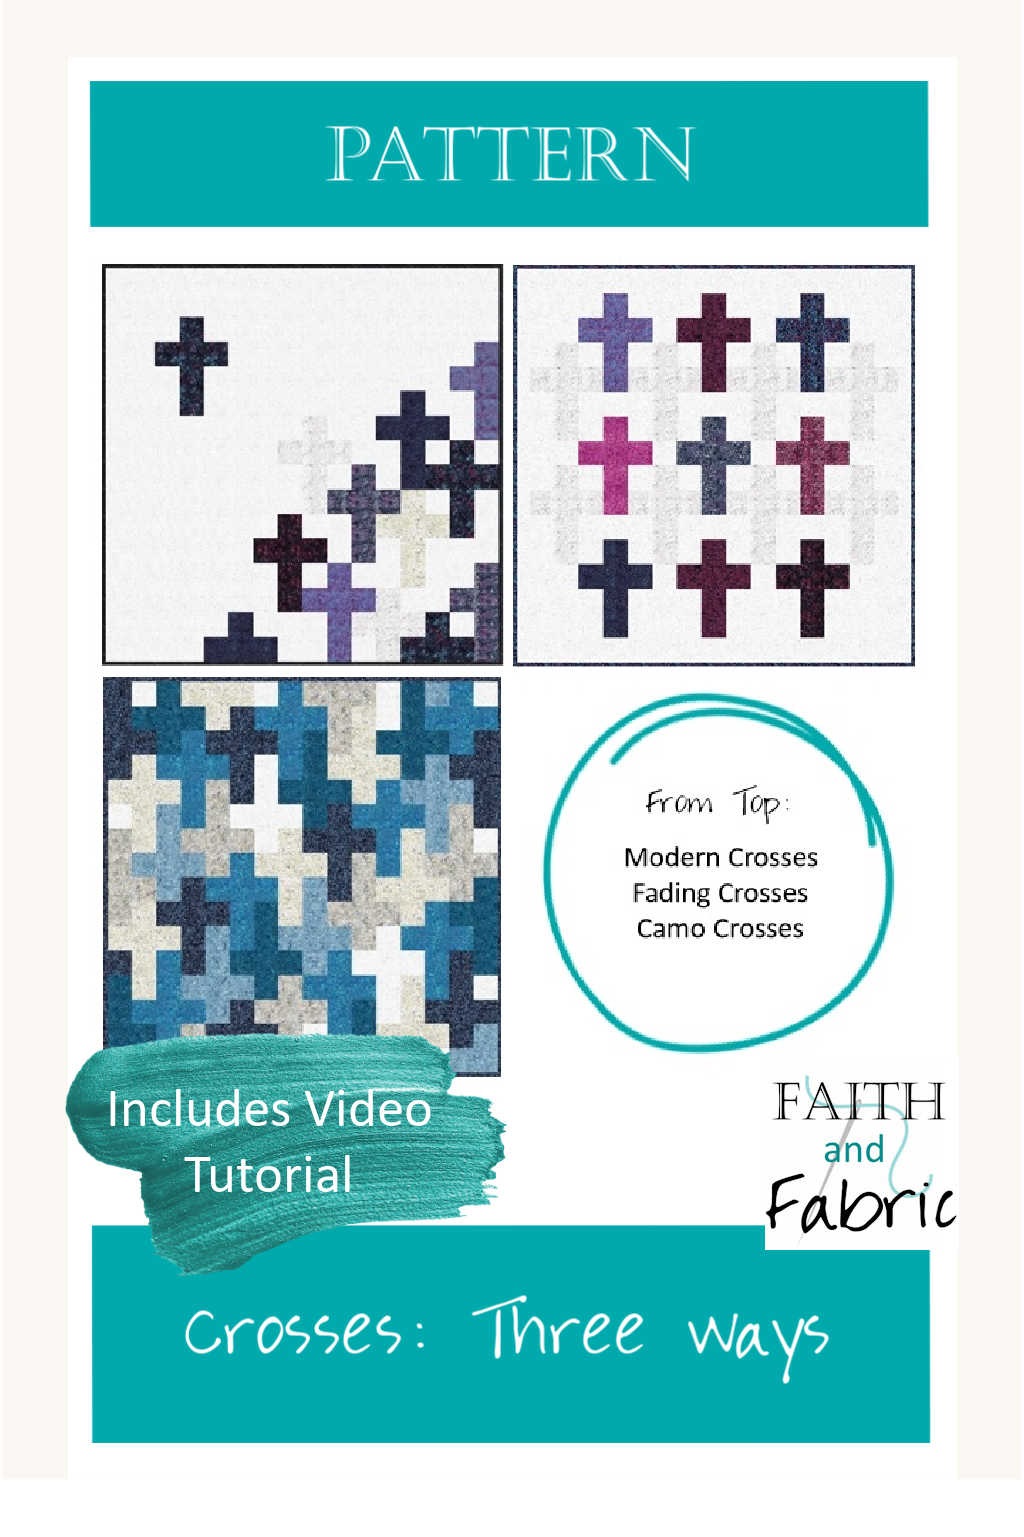 Create not one but THREE different cross quilt patterns!